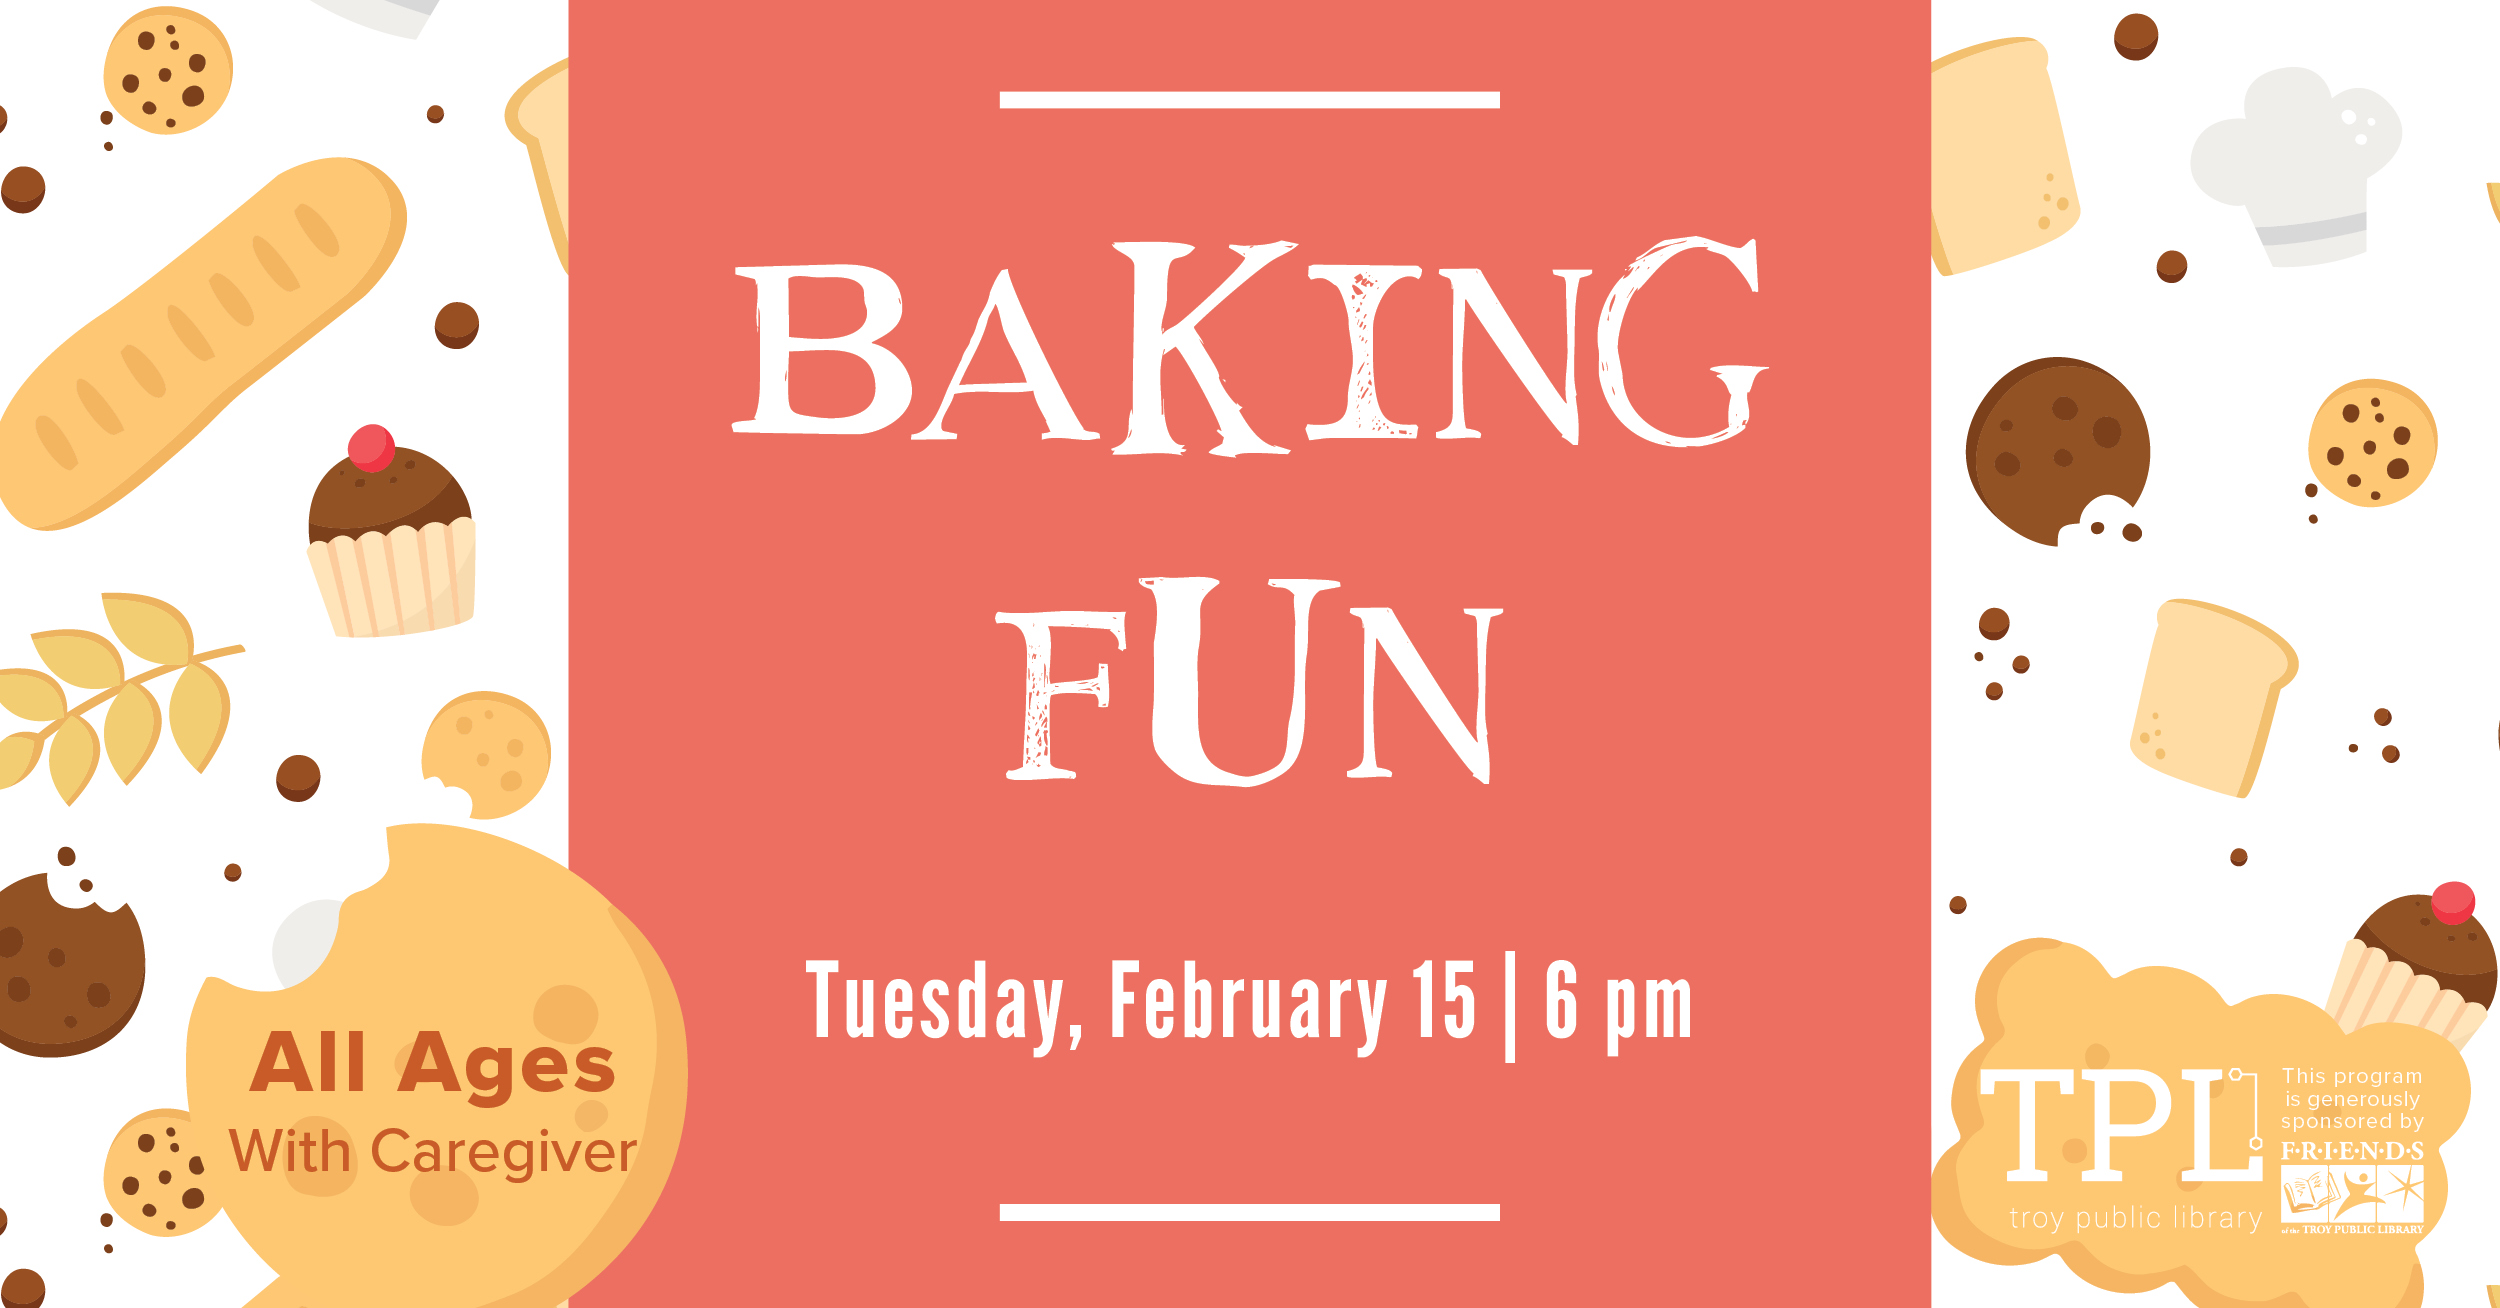 Baking Fun Tuesday, February 15 at 6pm All Ages with caregiver. Sponsored by the Friends of the Troy Public Library